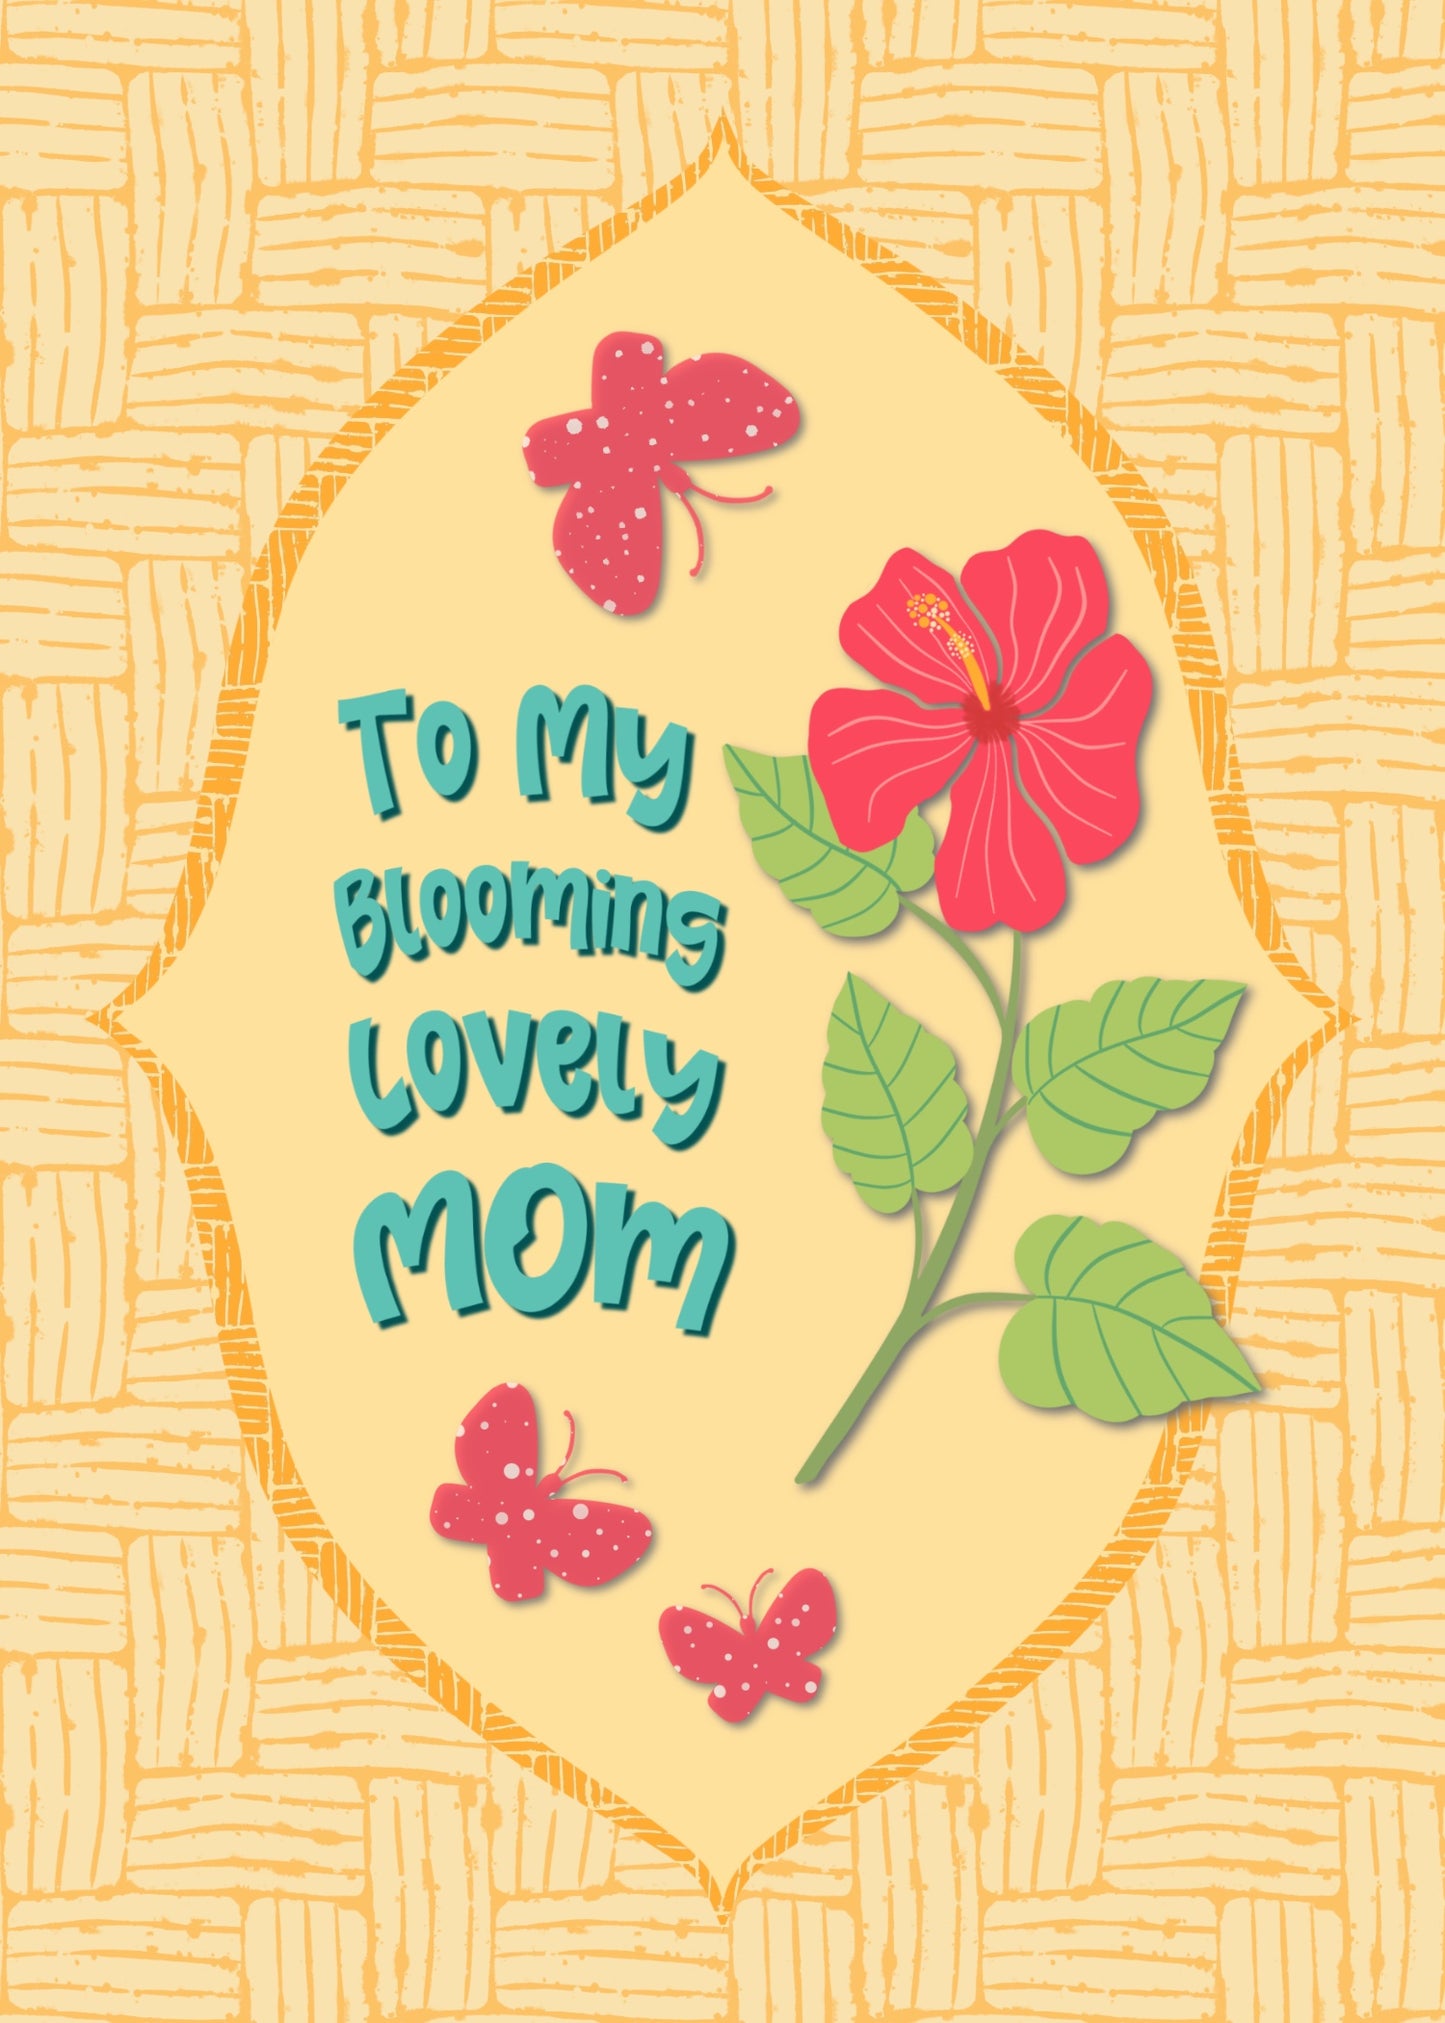 To My Blooming Lovely Mom Mother’s Day Card - Simple Floral Design with Mom in Large Script | Instant Digital Download